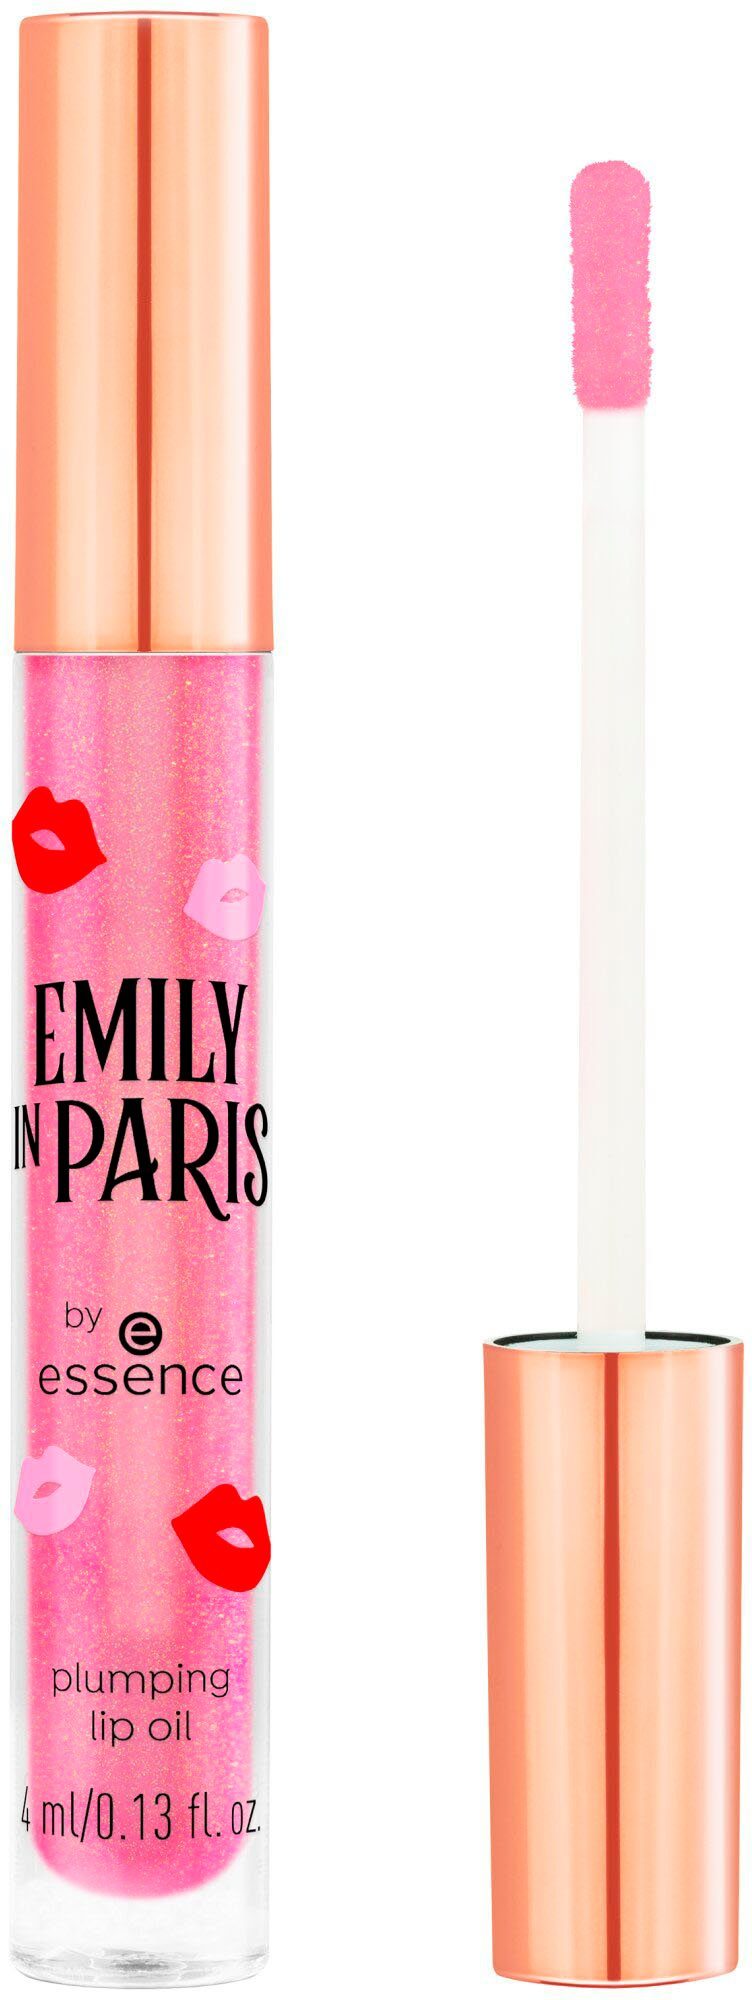 Essence Lipgloss EMILY essence plumping by lip oil PARIS IN